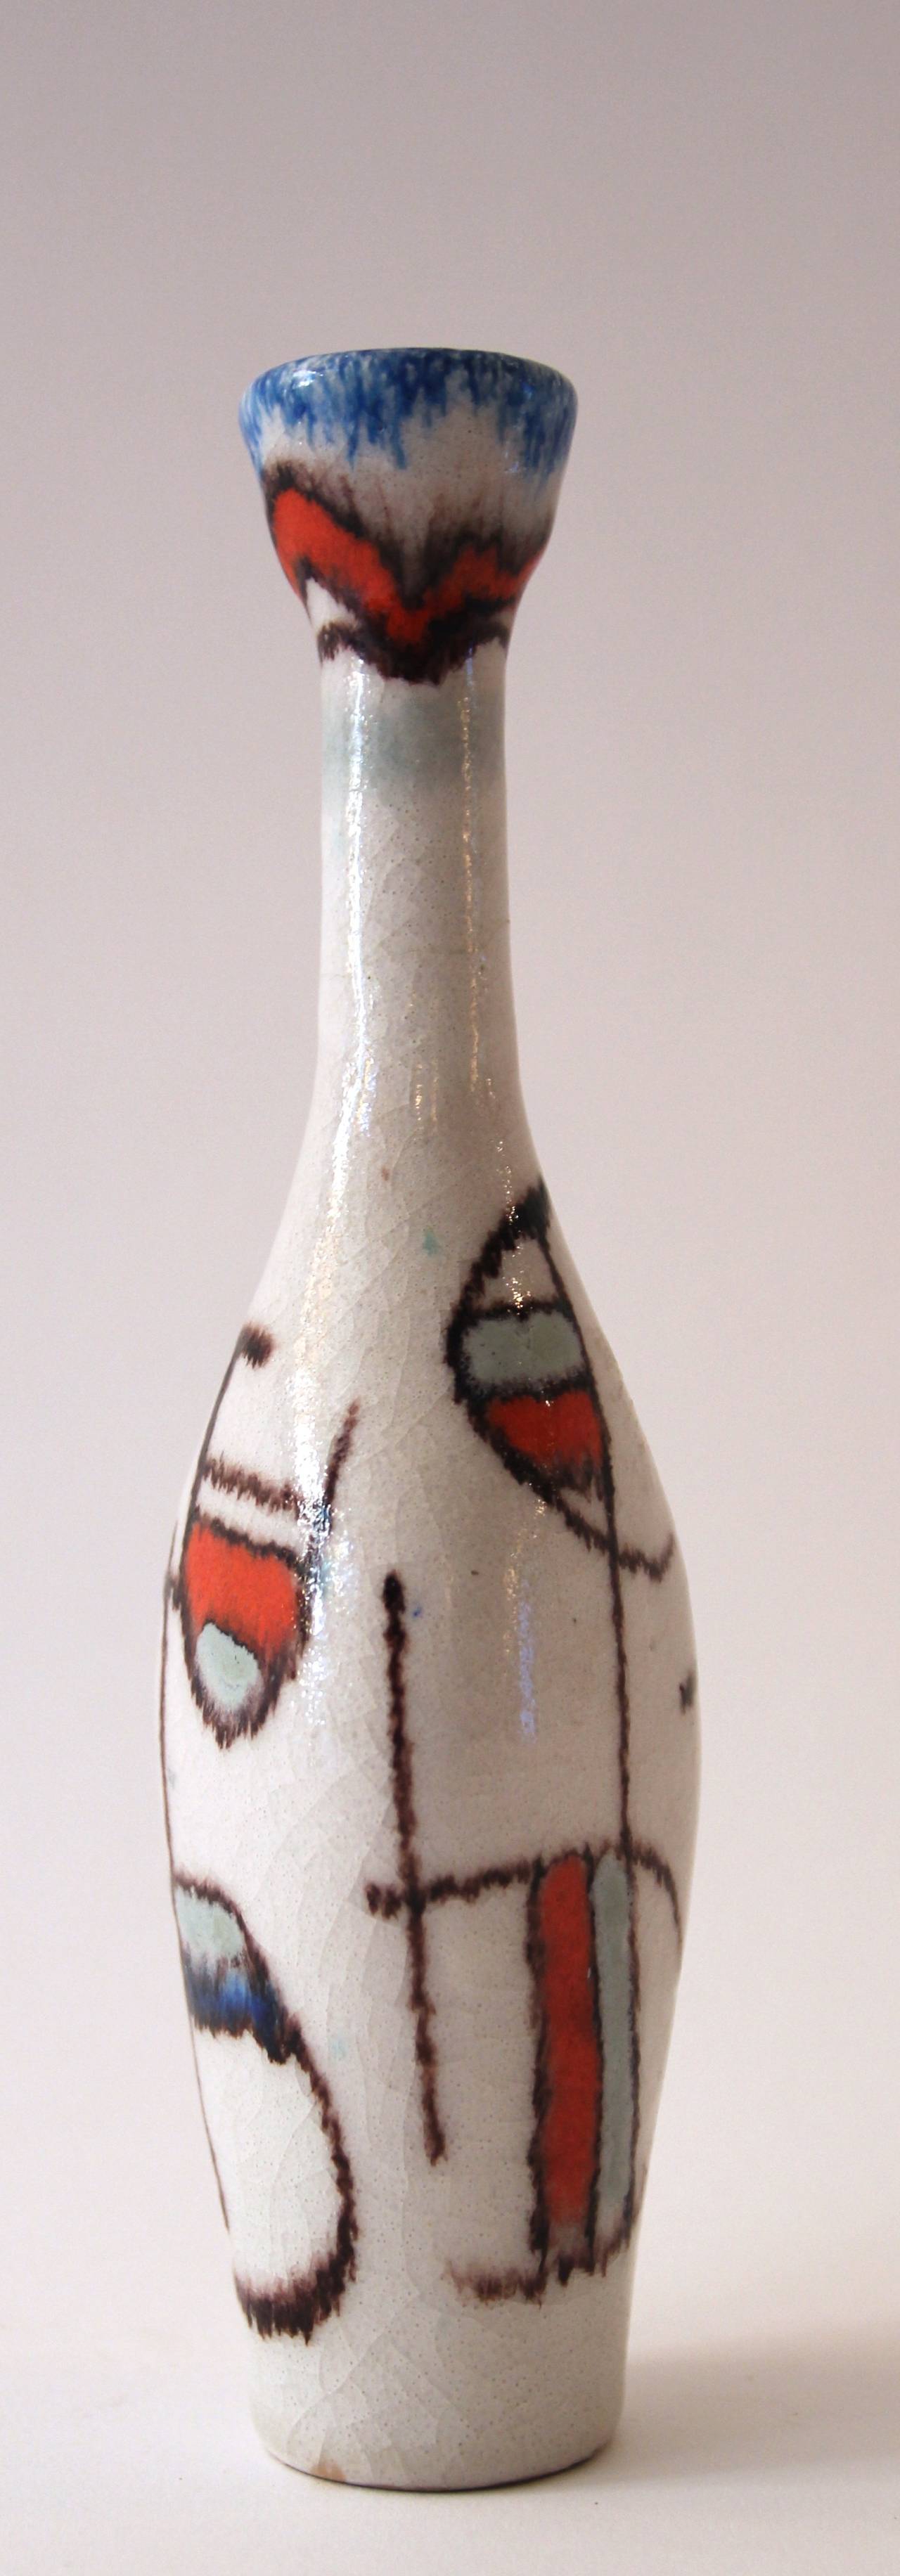 Guido Gambone,
Bottle decorated glazed earthenware,
Signed and stamped: Gambone, Italy, 1960.
Height: 22 cm diameter: 3 cm.